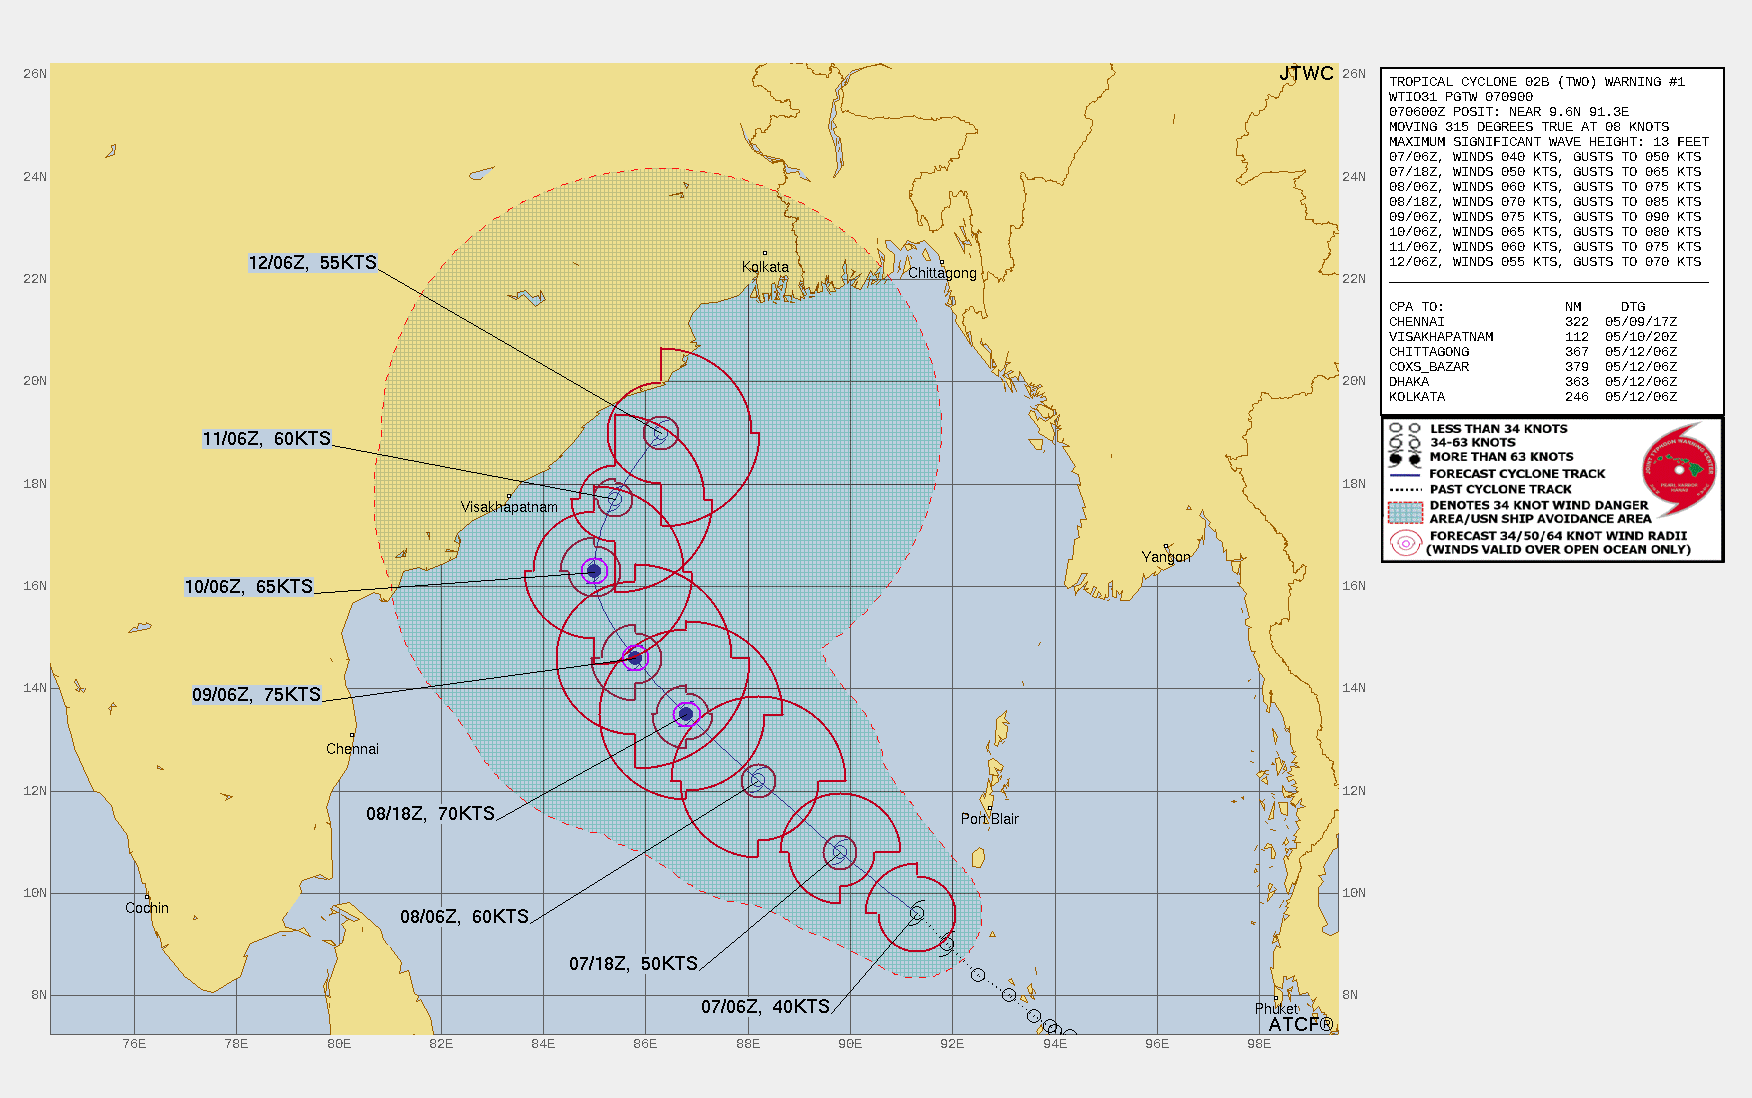 FORECAST REASONING.  SIGNIFICANT FORECAST CHANGES: THIS INITIAL PROGNOSTIC REASONING MESSAGE ESTABLISHES THE FORECAST PHILOSOPHY.  FORECAST DISCUSSION: TC 02B IS EXPECTED TO CONTINUE TRACKING NORTHWESTWARD ALONG THE PERIPHERY OF THE SUBTROPICAL RIDGE (STR) THROUGH 48H. DUE TO THE COMPACT CORE AND GENERALLY FAVORABLE CONDITIONS, TC 02B WILL INTENSIFY AT A CLIMATOLOGICAL RATE THROUGH 48H REACHING A PEAK INTENSITY OF 75 KNOTS/CAT 1 US. AFTER 48H, THE STR IS FORECAST TO REALIGN IN RESPONSE TO AN APPROACHING MIDLATITUDE SHORTWAVE TROUGH, WHICH WILL DEEPEN OVER EASTERN INDIA, ALLOWING THE SYSTEM TO TURN POLEWARD. GRADUAL WEAKENING IS ANTICIPATED AS UPPER-LEVEL EASTERLY FLOW INCREASES AND POLEWARD OUTFLOW WEAKENS. AFTER 72H, THE SYSTEM WILL RECURVE NORTH-NORTHEASTWARD AND WEAKEN STEADILY AS IT ENCOUNTERS MIDLATITUDE WESTERLIES AND ENTRAINS DRY AIR.